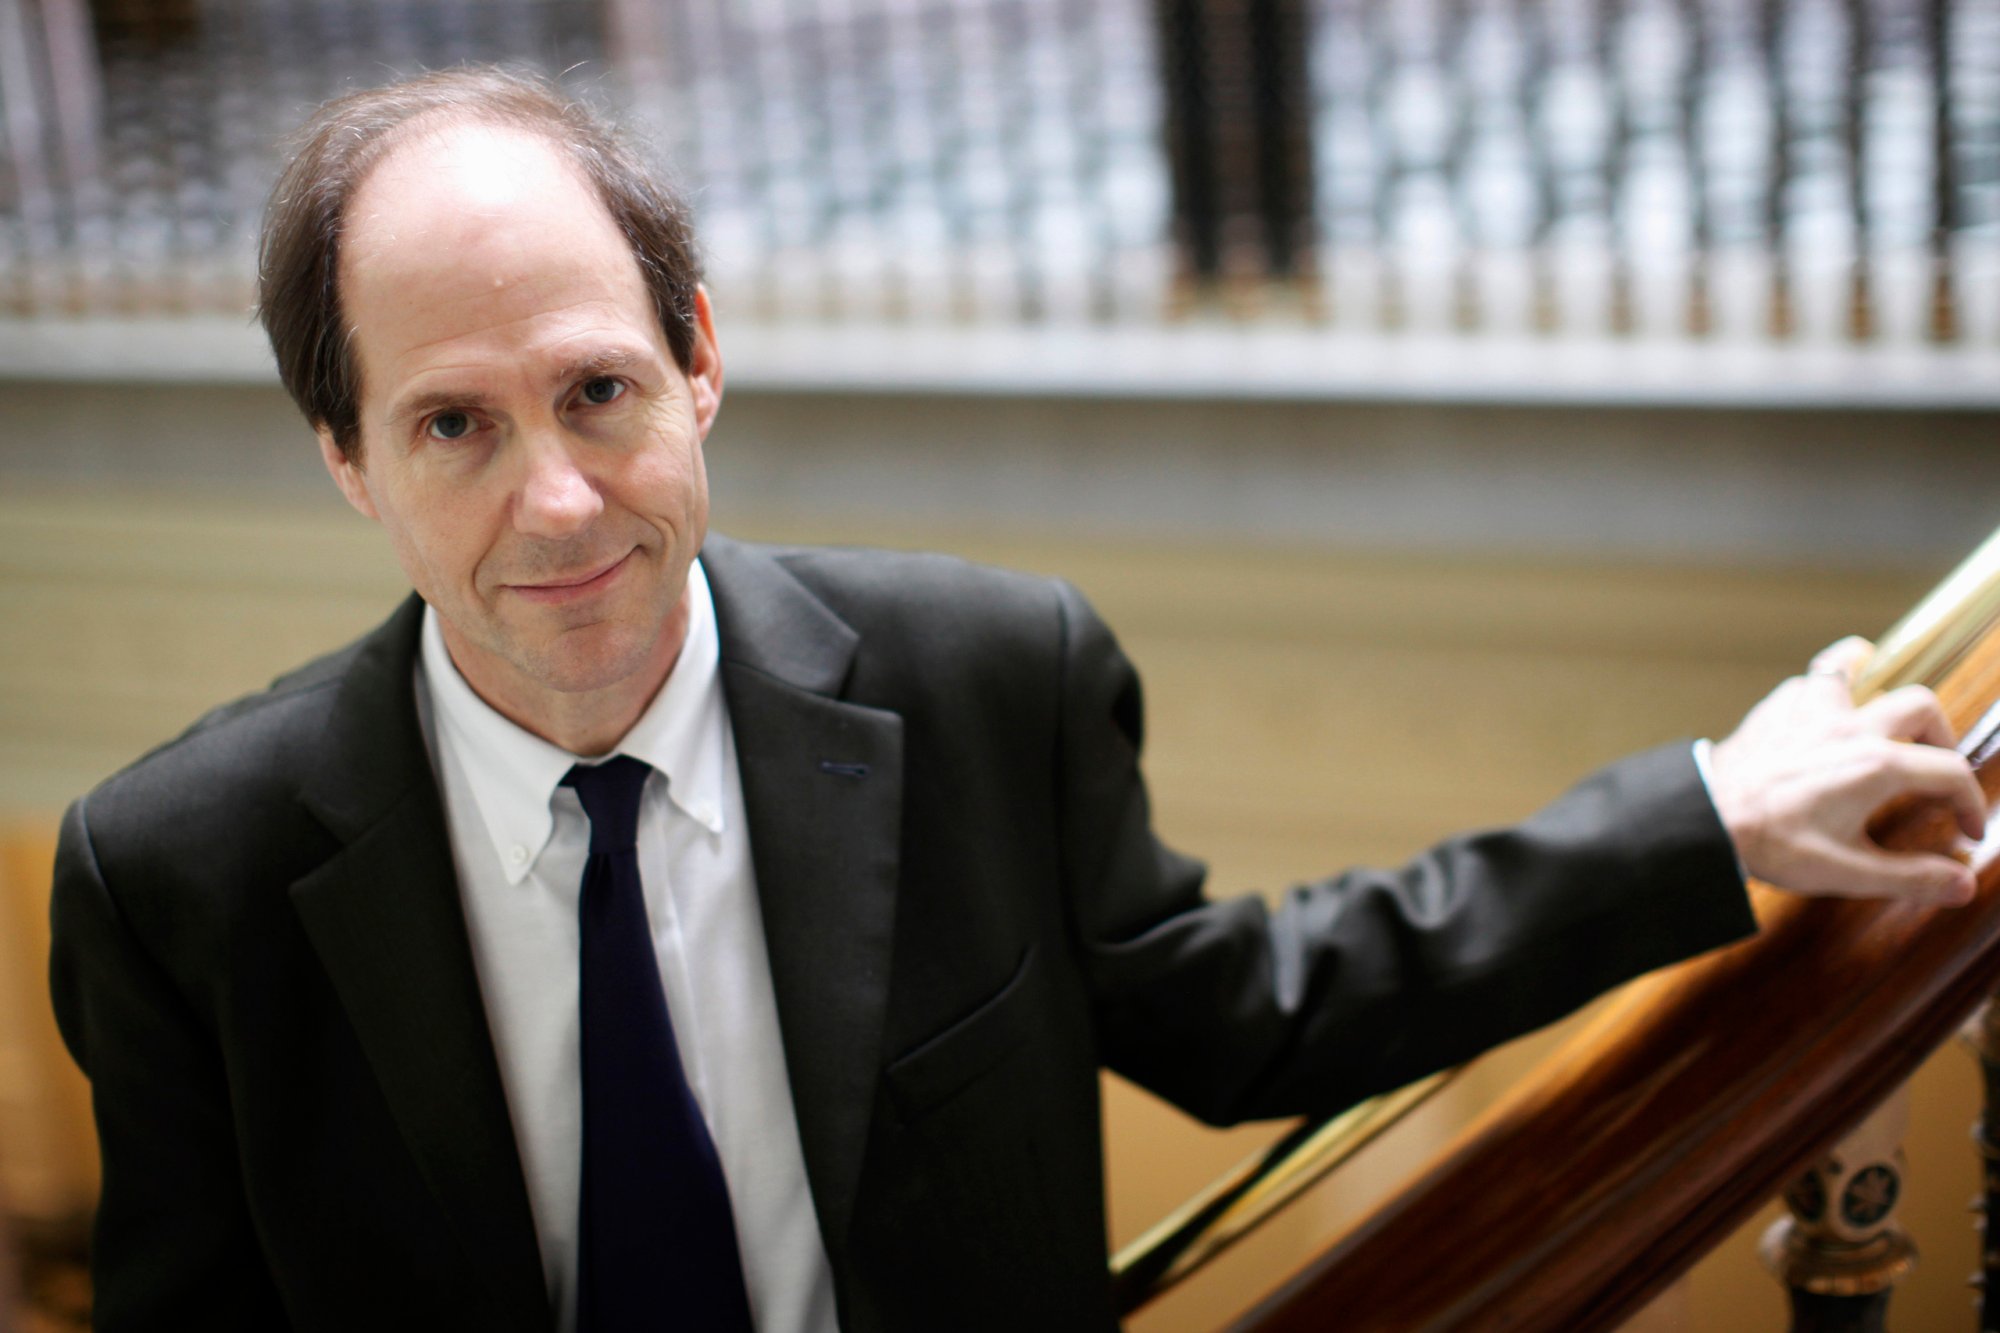 Cass Sunstein | Preeminent Legal Scholar and Winner of the Holberg Prize